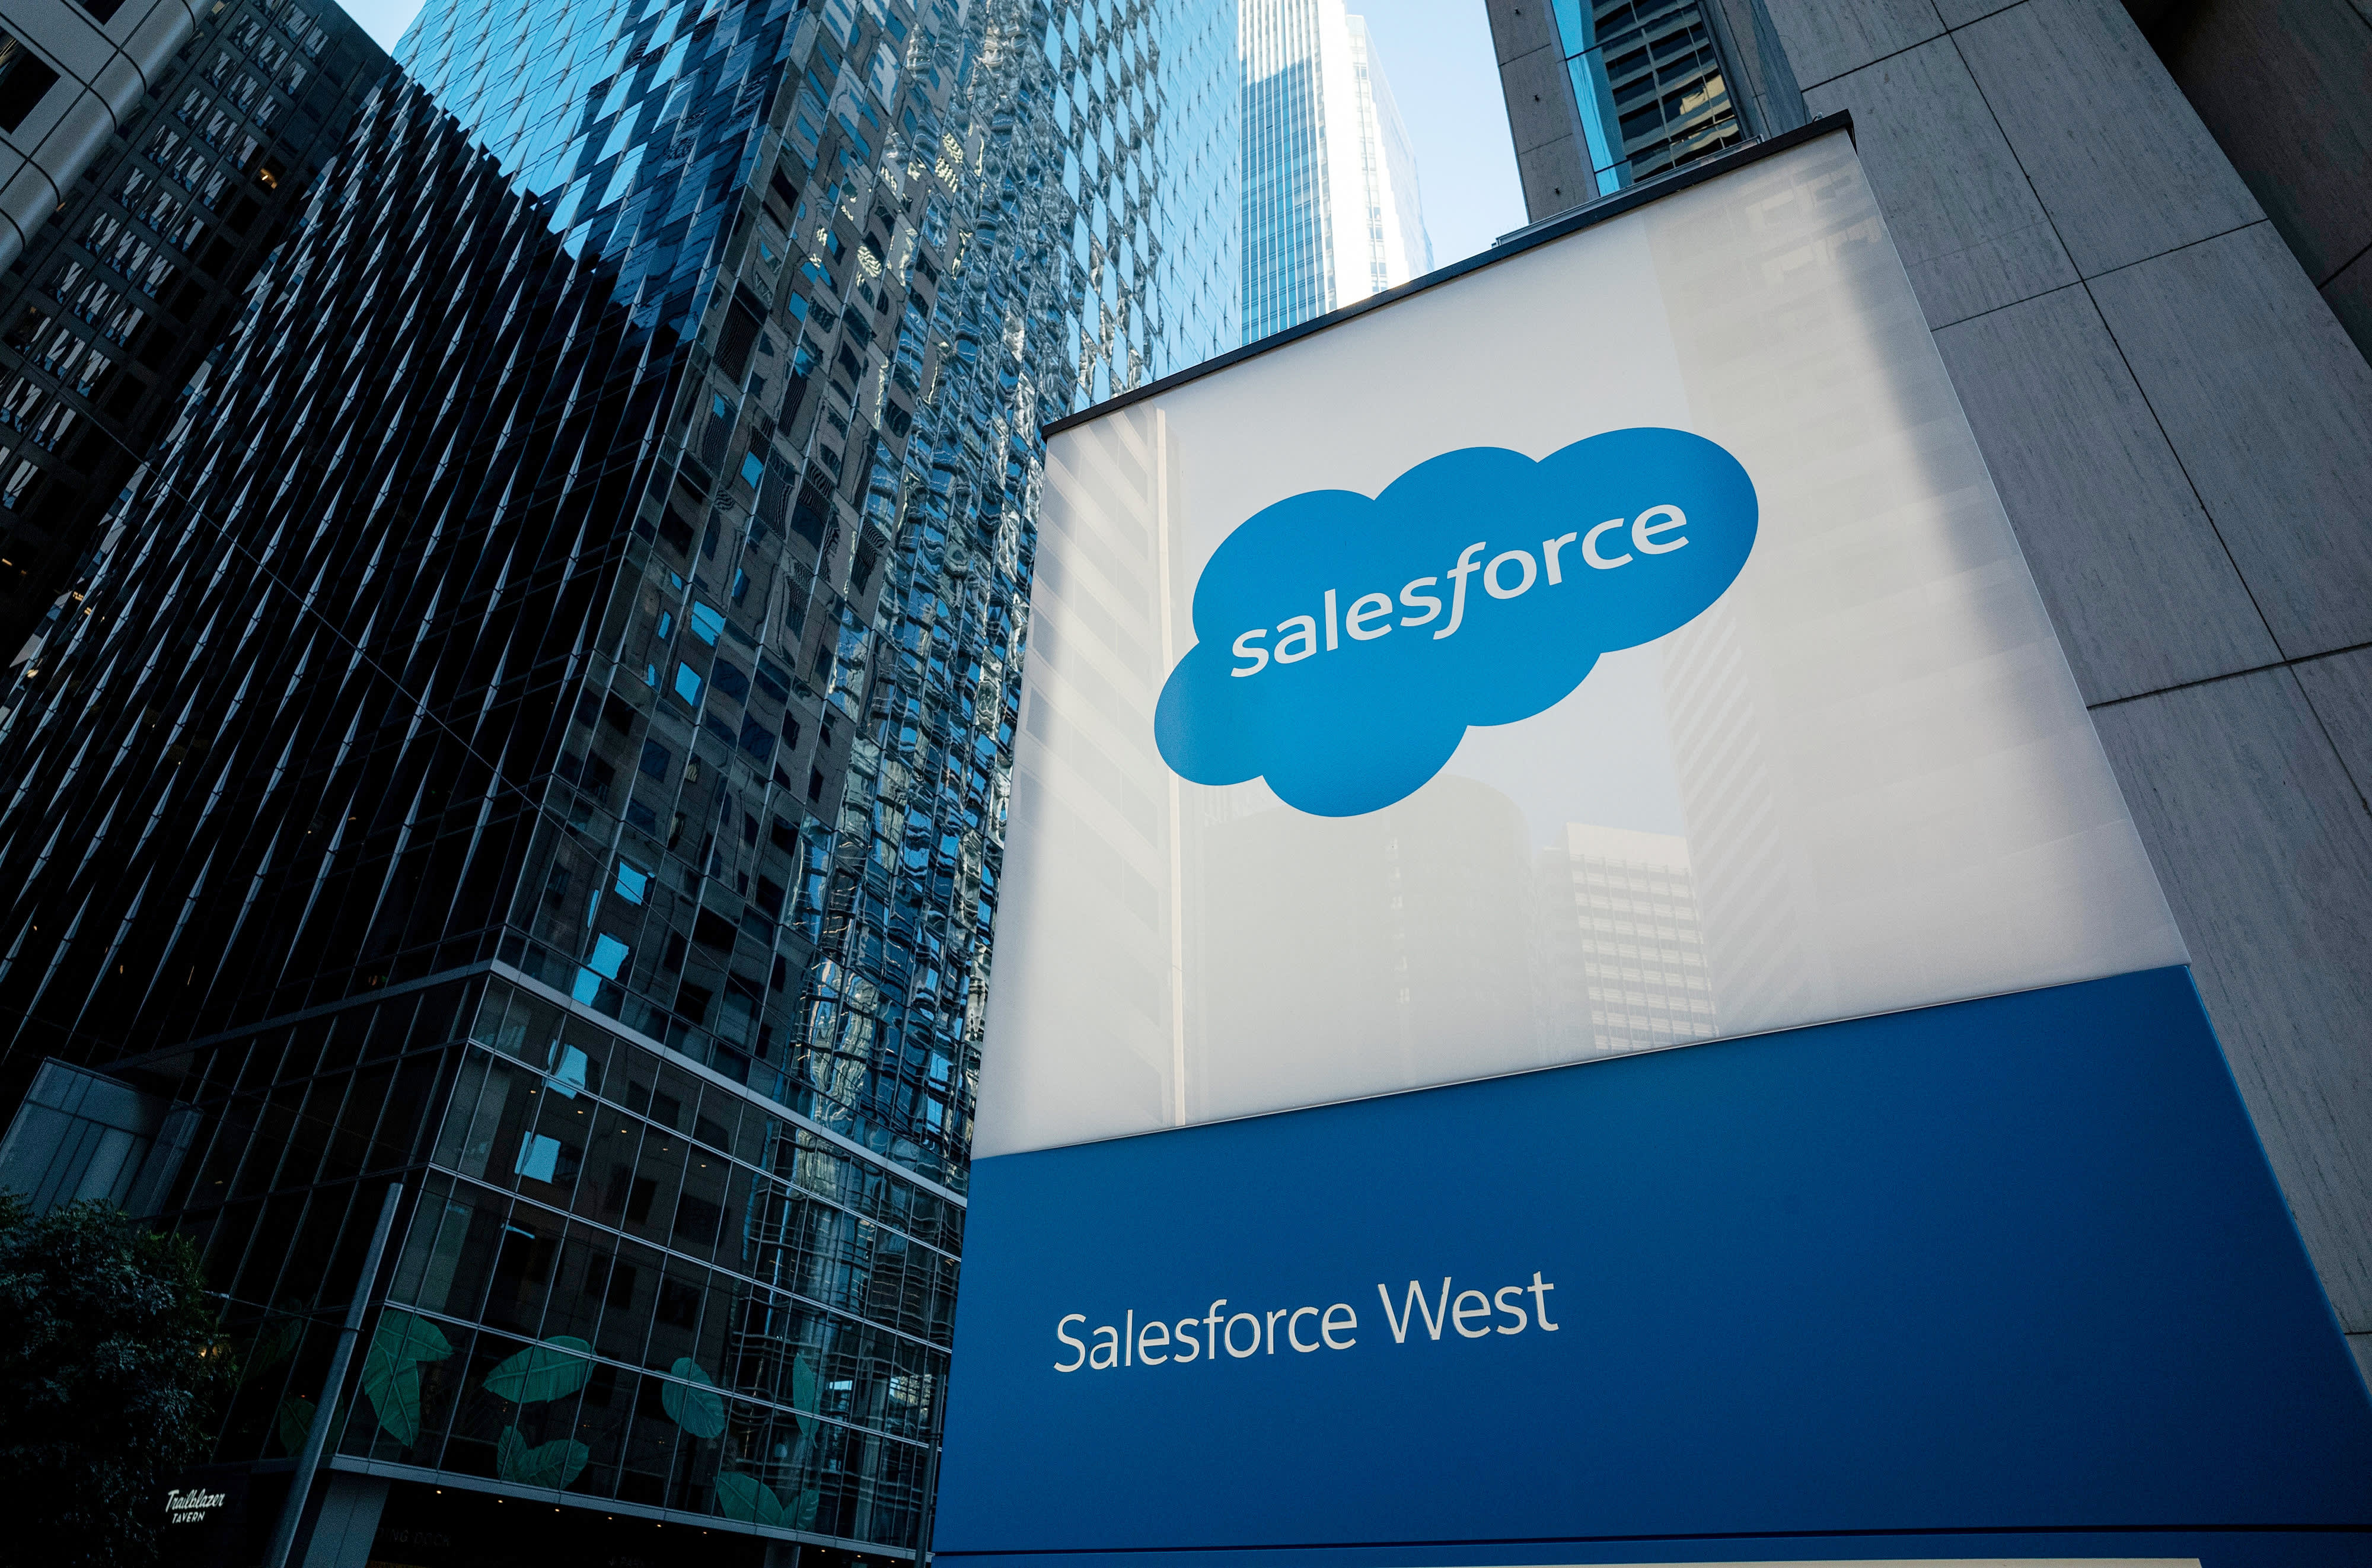 How Wall Street pros traded 7 of our Club stocks, including Salesforce, in the first quarter